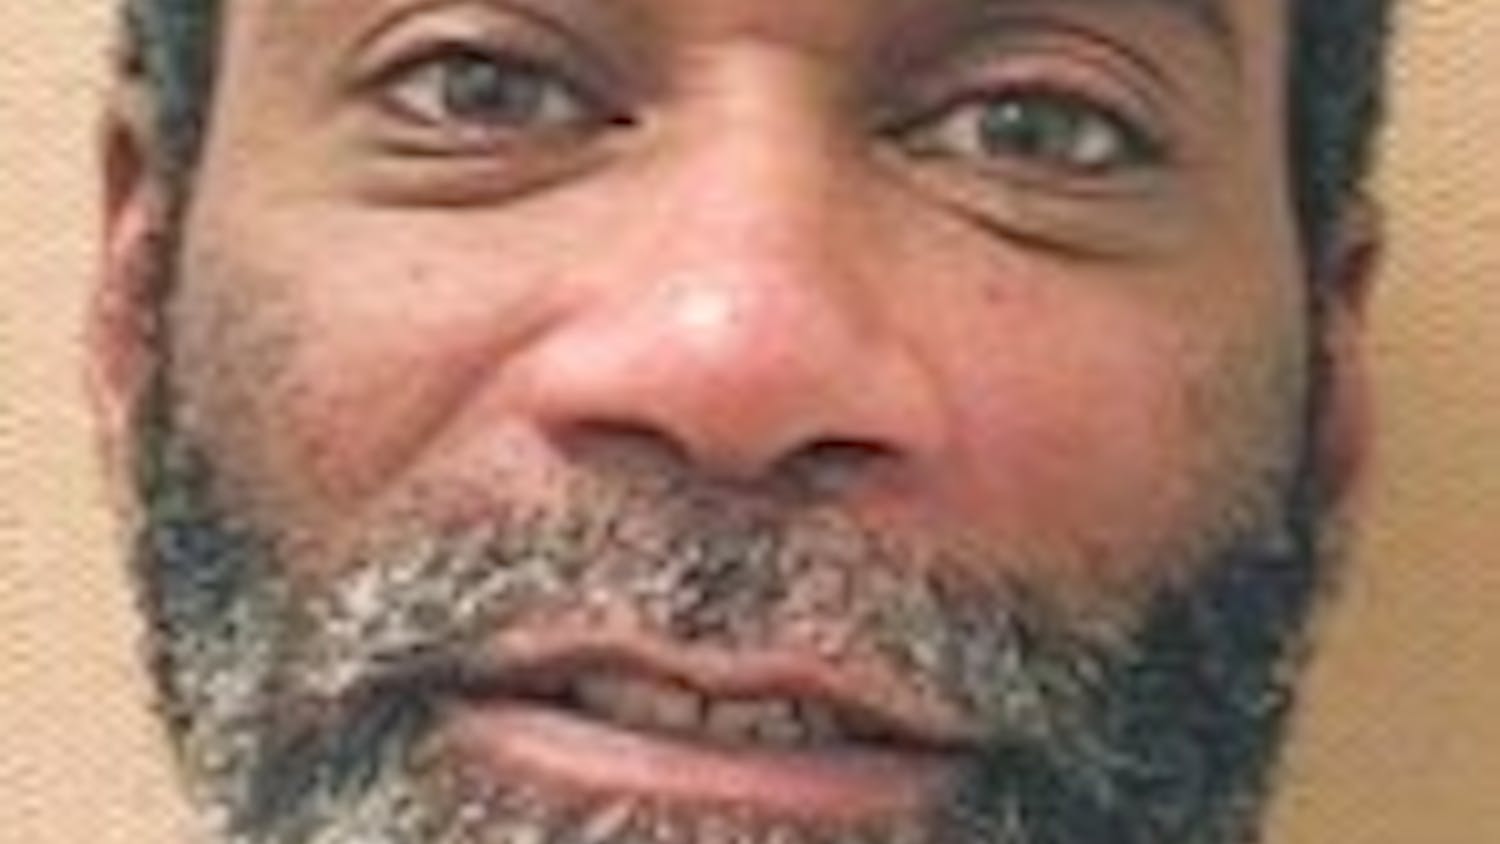 	Farley Linford Bernard, 46, is one of hundreds of inmates who receive care at UNC Hospitals each year. He escaped Tuesday.